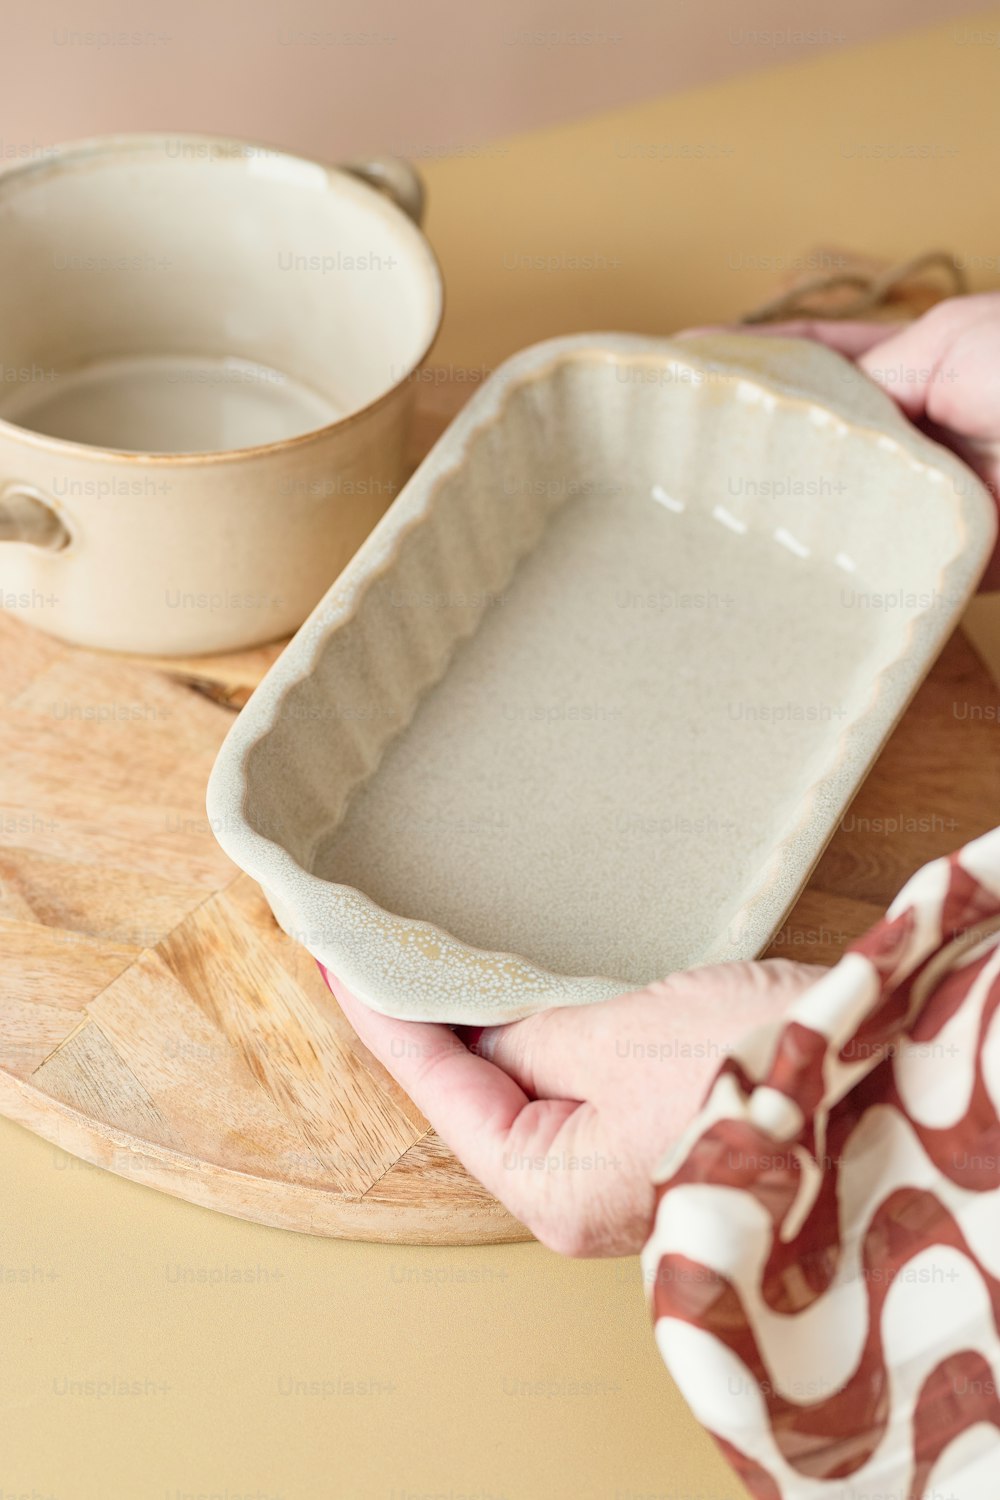 a person holding a baking dish on a wooden tray